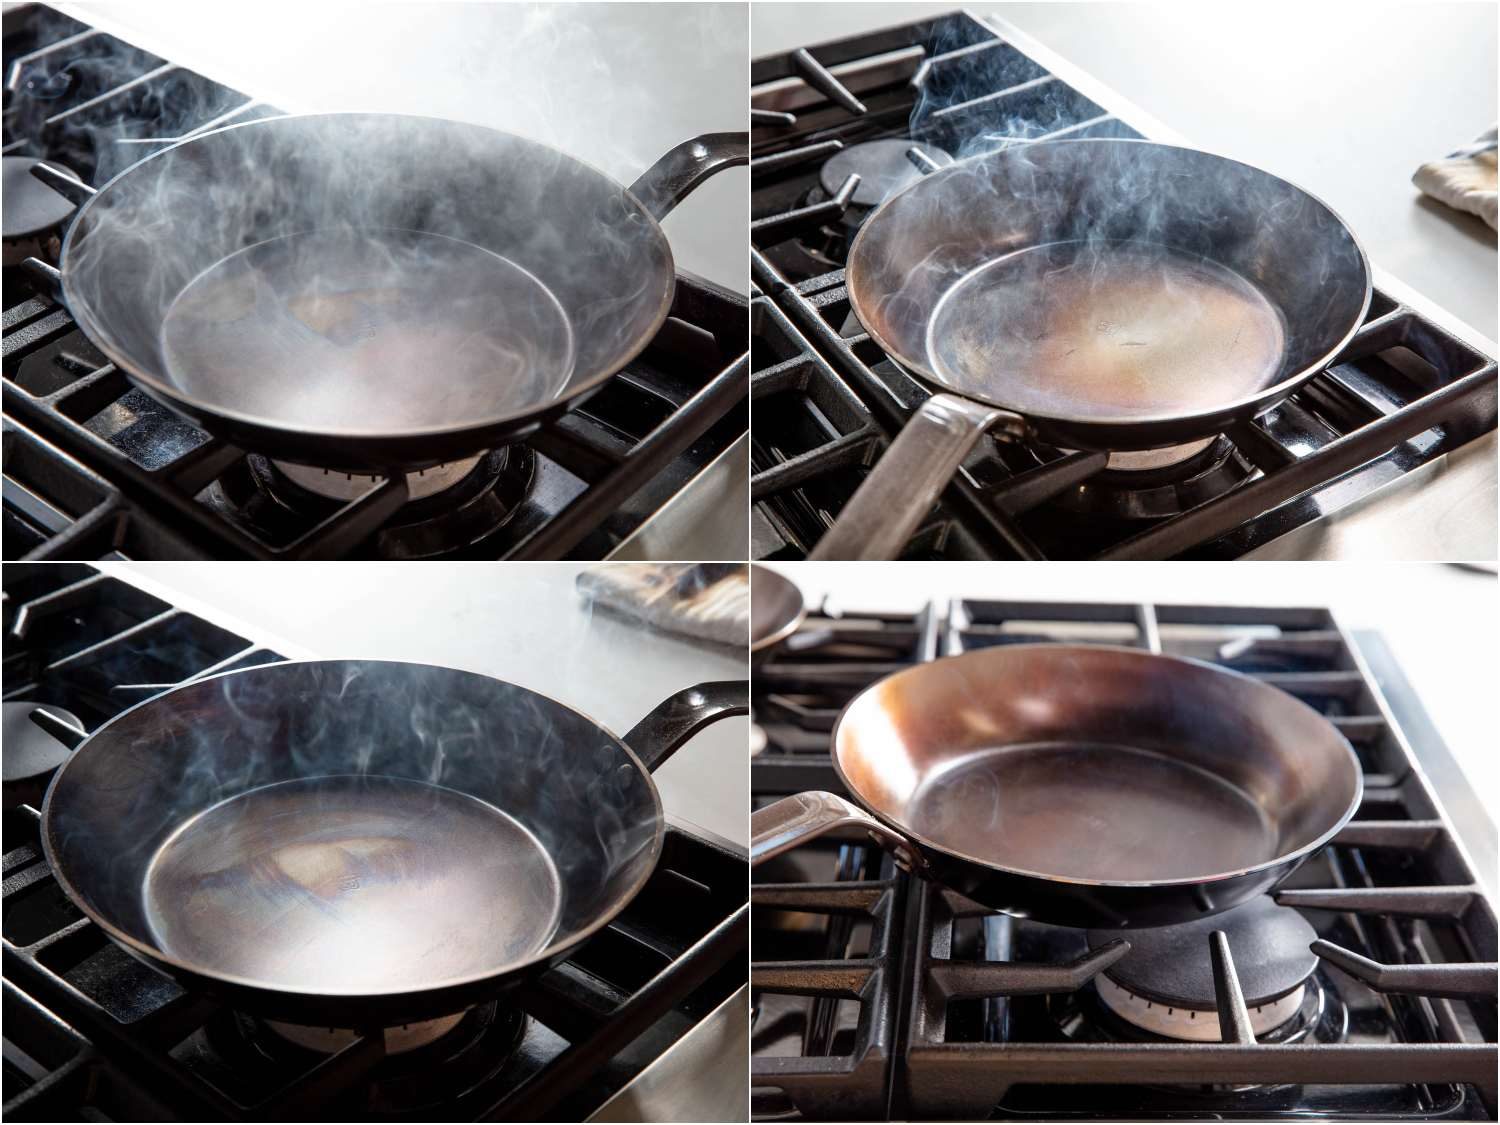 Burning seasoning onto a carbon steel pan; the sequence shows a pan smoking heavily, and eventually the smoke fades.